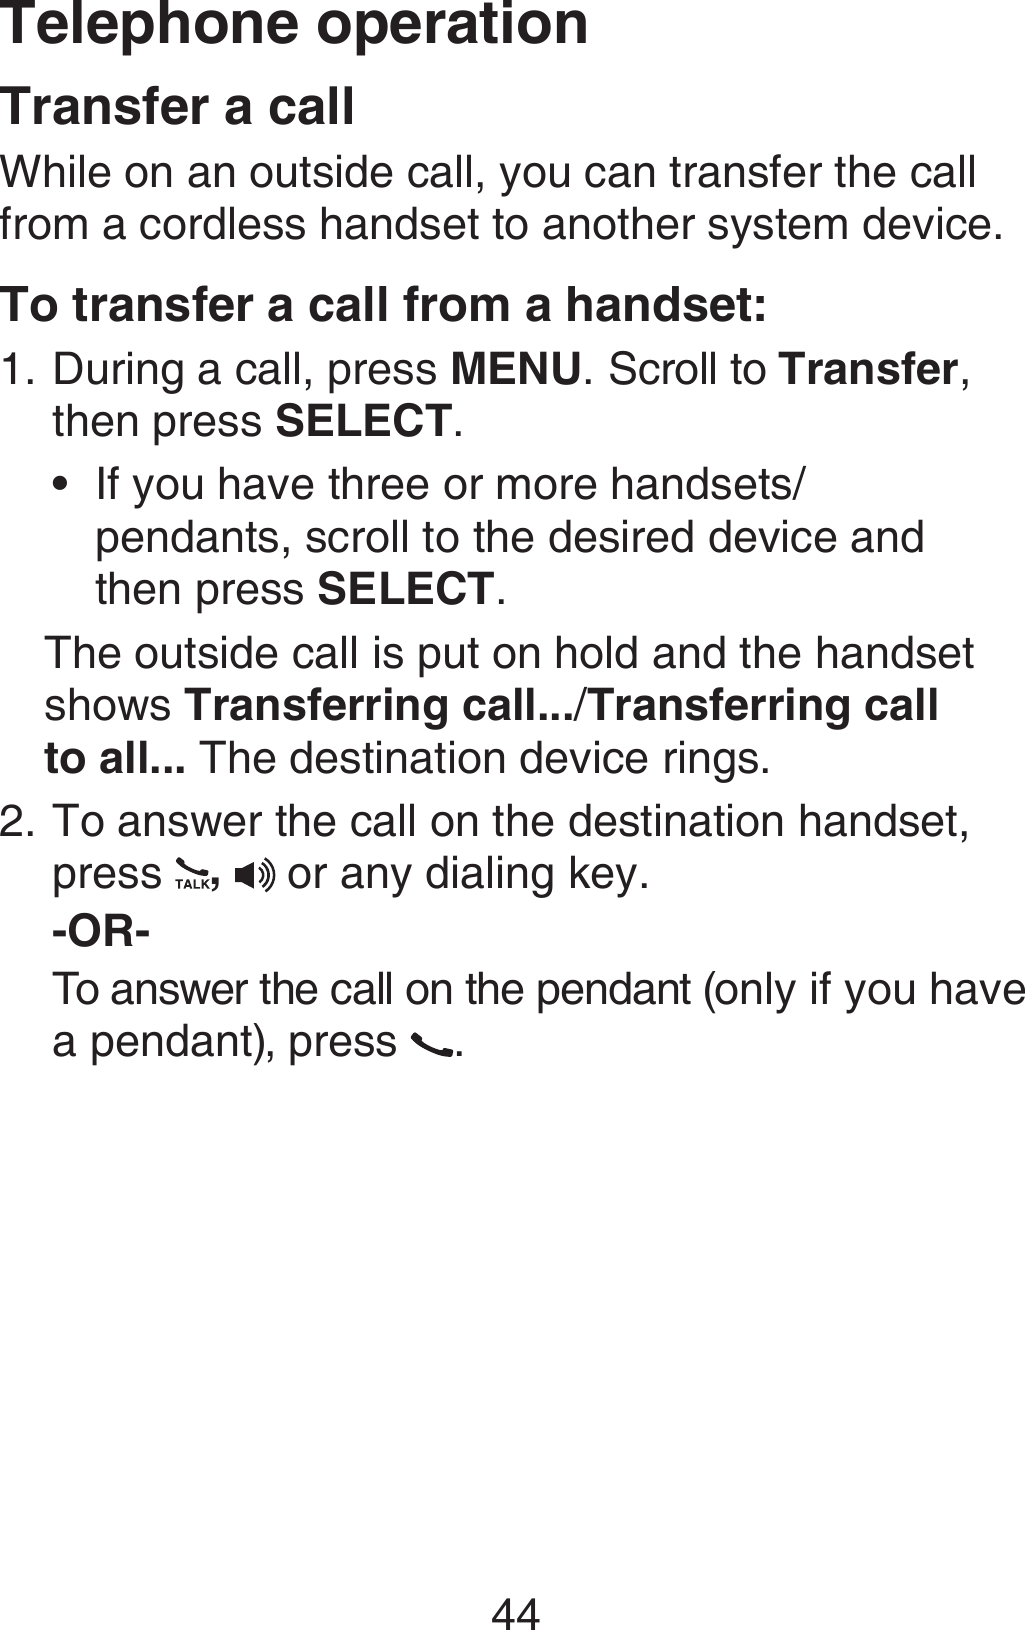 Telephone operation44Transfer a callWhile on an outside call, you can transfer the call from a cordless handset to another system device. To transfer a call from a handset:During a call, press MENU. Scroll to Transfer, then press SELECT. If you have three or more handsets/ pendants, scroll to the desired device and  then press SELECT. The outside call is put on hold and the handset shows Transferring call.../Transferring call  to all... The destination device rings.To answer the call on the destination handset, press  ,  or any dialing key.-OR-To answer the call on the pendant (only if you have a pendant), press  .1.•2.